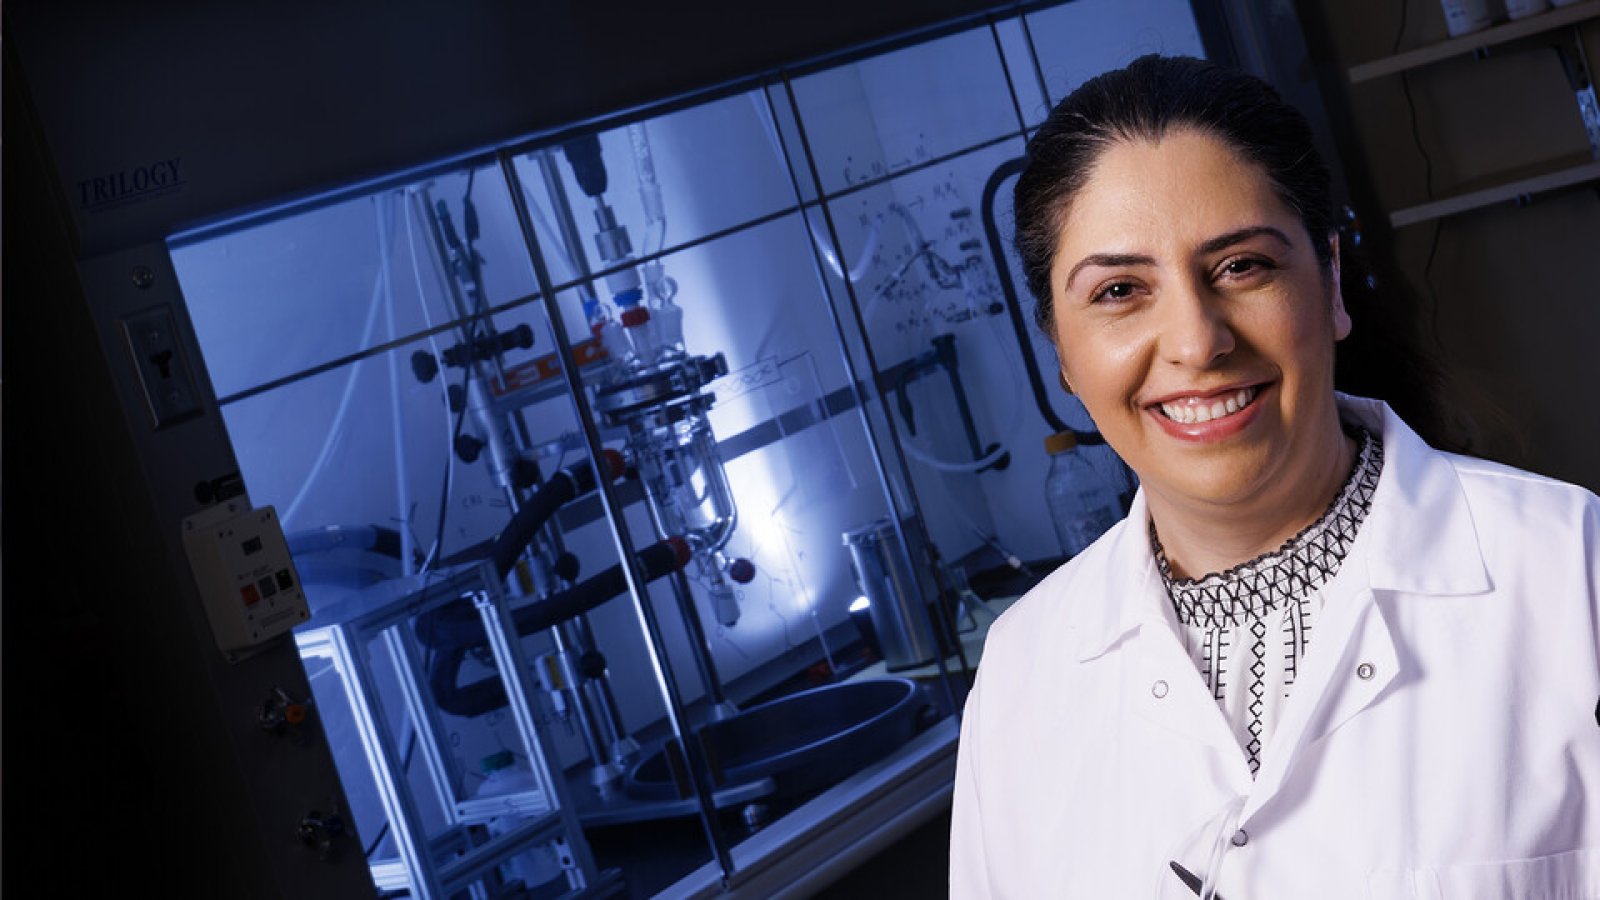 Mona Bavarian, assistant professor of chemical and biomolecular engineering at Nebraska, has received a $576,802 grant from the National Science Foundation’s Faculty Early Career Development Program to develop an advanced manufacturing platform for polymer coatings. (Craig Chandler / University Communication and Marketing)